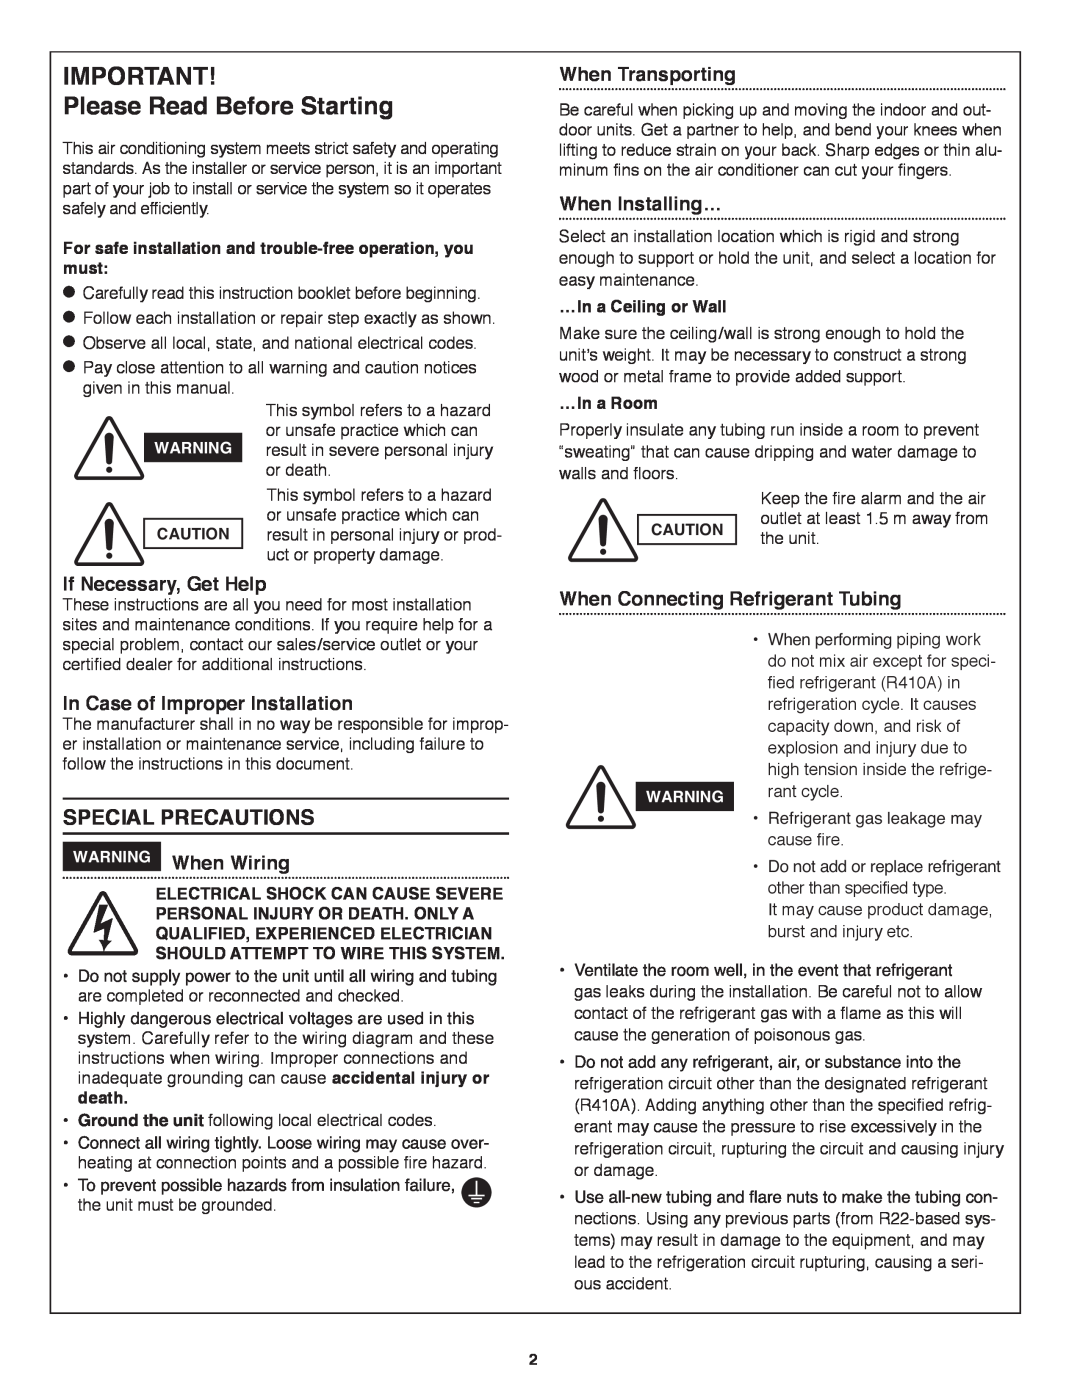 Panasonic R410A Please Read Before Starting, Special Precautions, If Necessary, Get Help, In Case of Improper Installation 